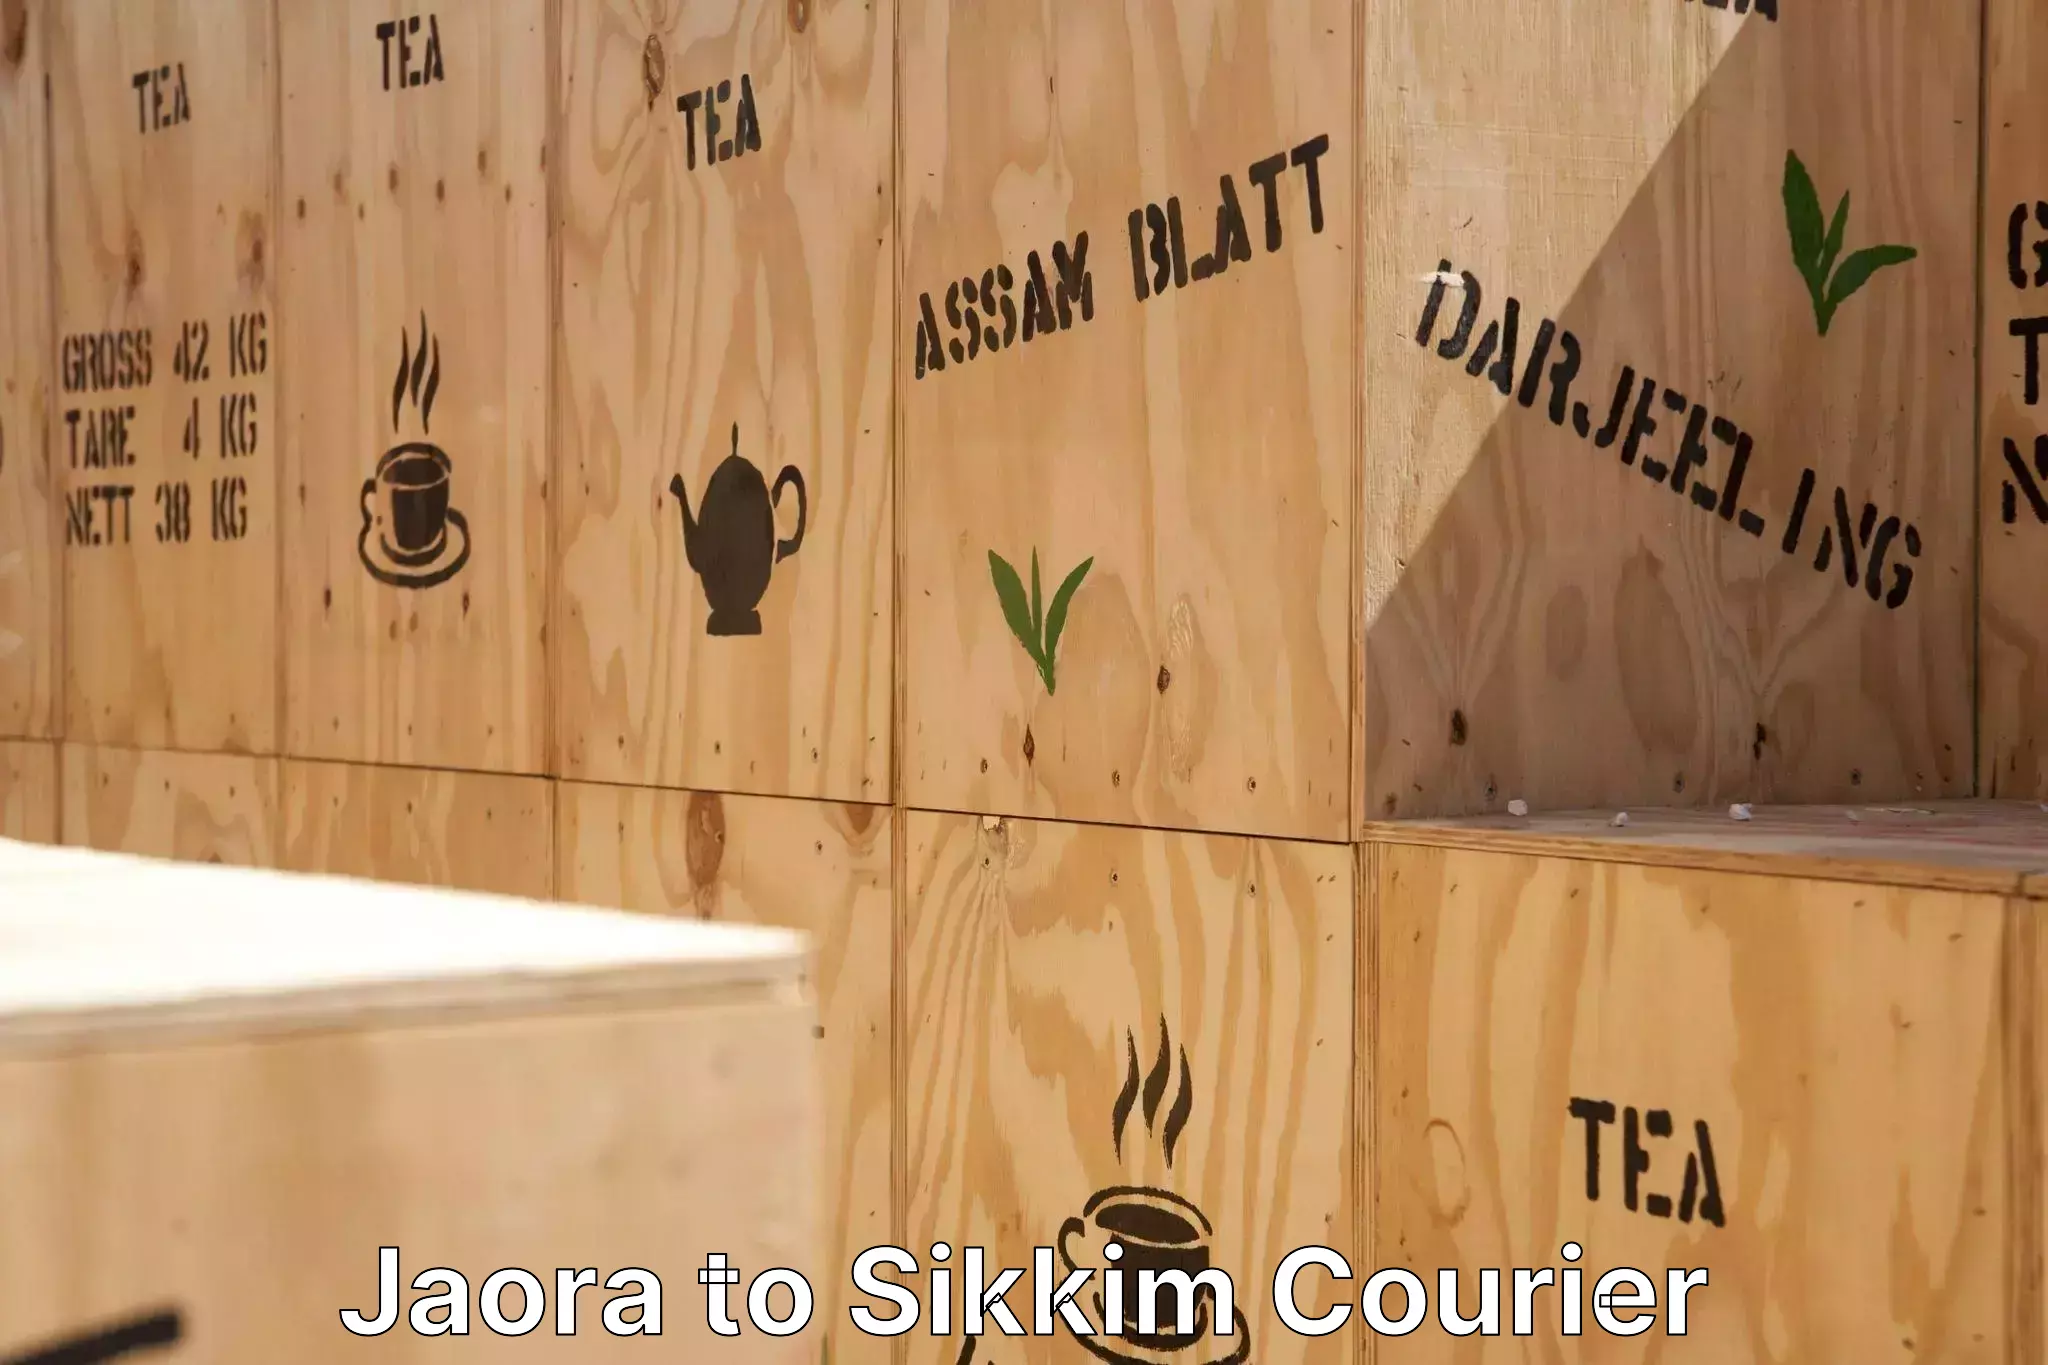 Specialized moving company Jaora to Pelling